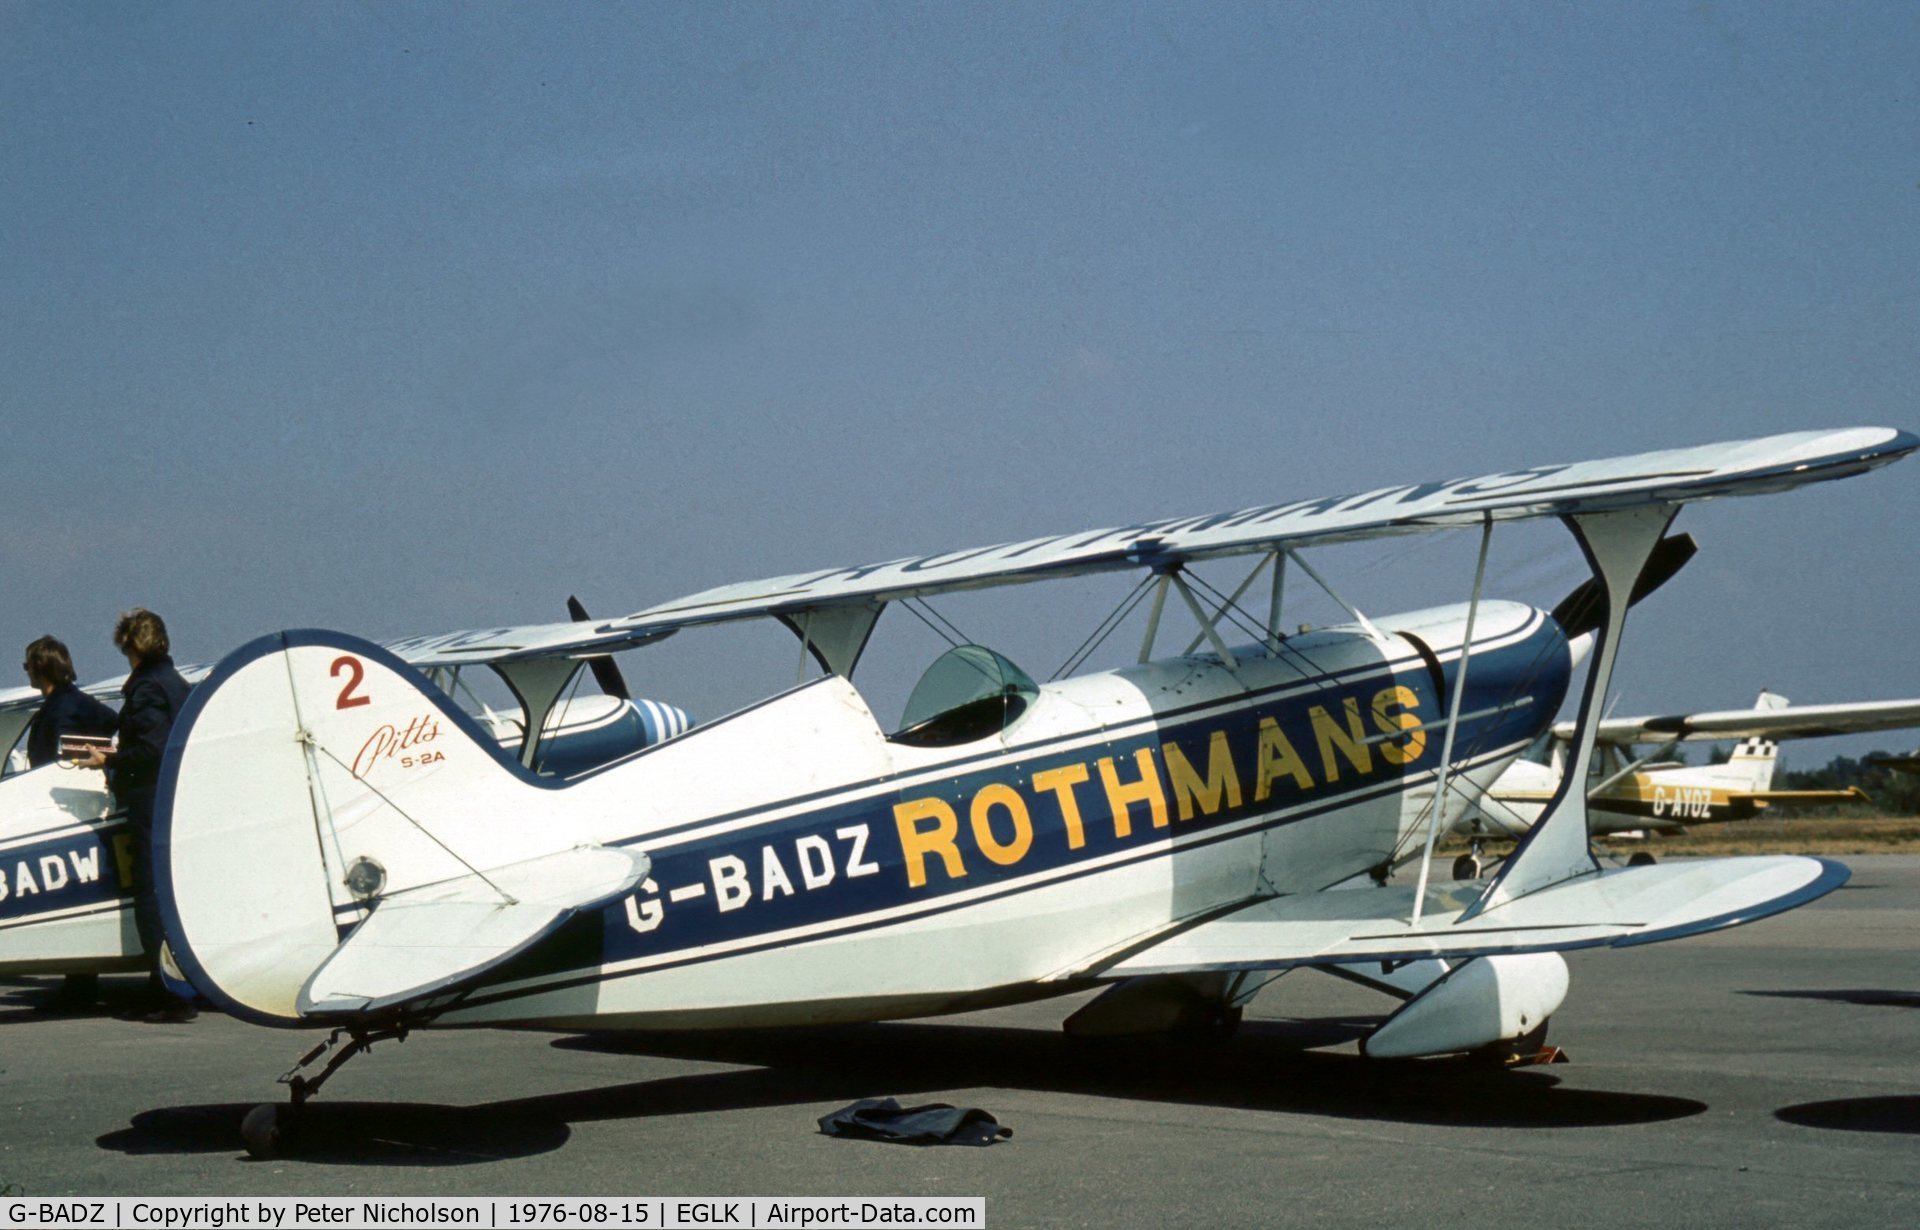 G-BADZ, 1972 Aerotek Pitts S-2A Special C/N 2038, Pitts S-2A of the Rothmans Aerobatic Display Team at the 1976 Blackbushe Fly-In.